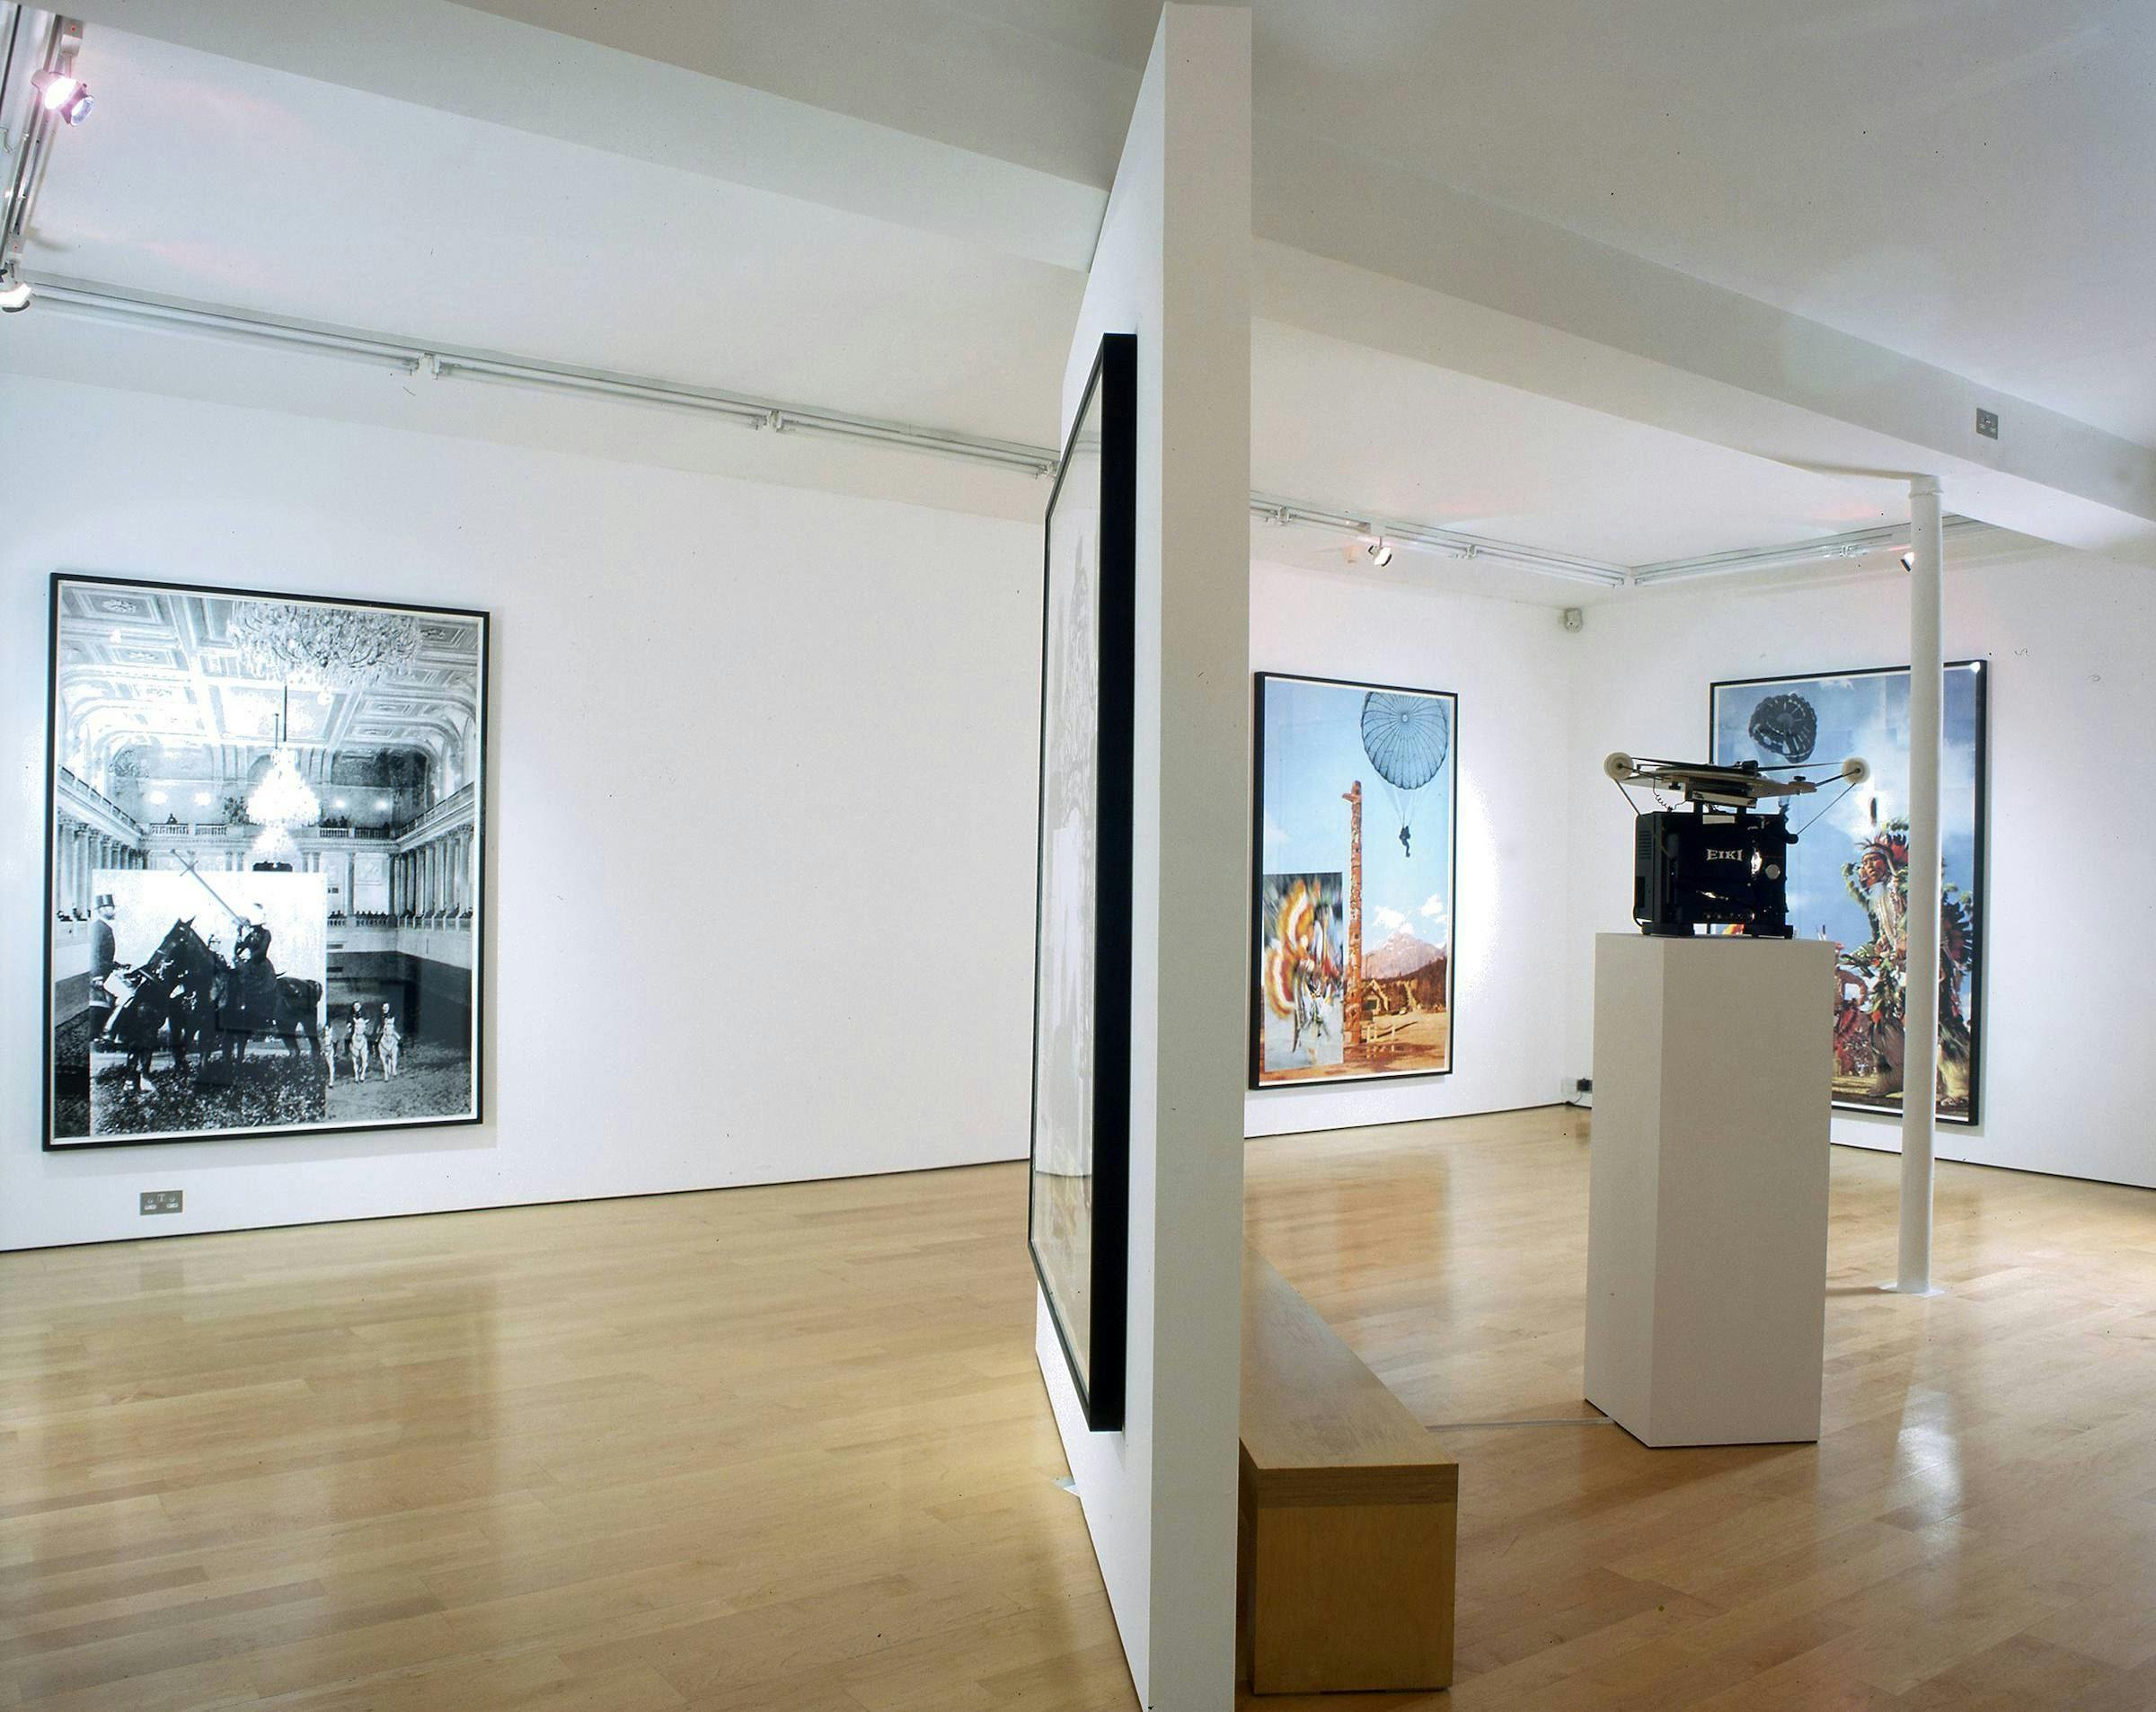 Image of a gallery where four large artworks hand on the walls, there is a bench, and an object sits on top a plinth